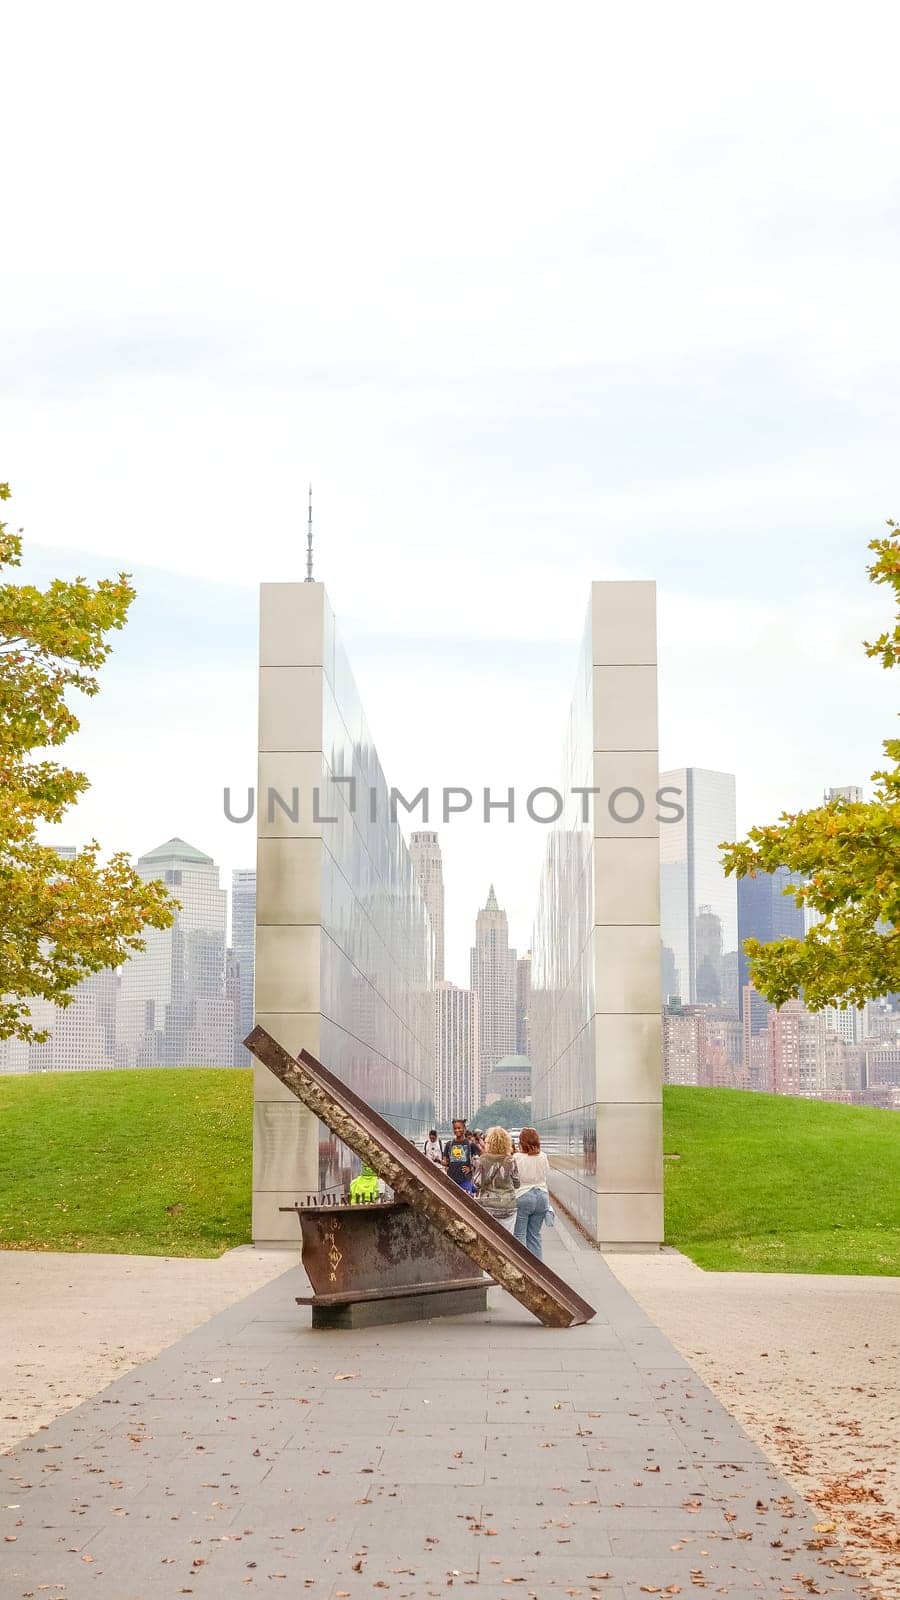 Empty Sky Memorial New Jersey for September 11 Terrorist Attack with Engraved Names of Victims. Patriot Day - New Jersey NY USA 2023-07-30.